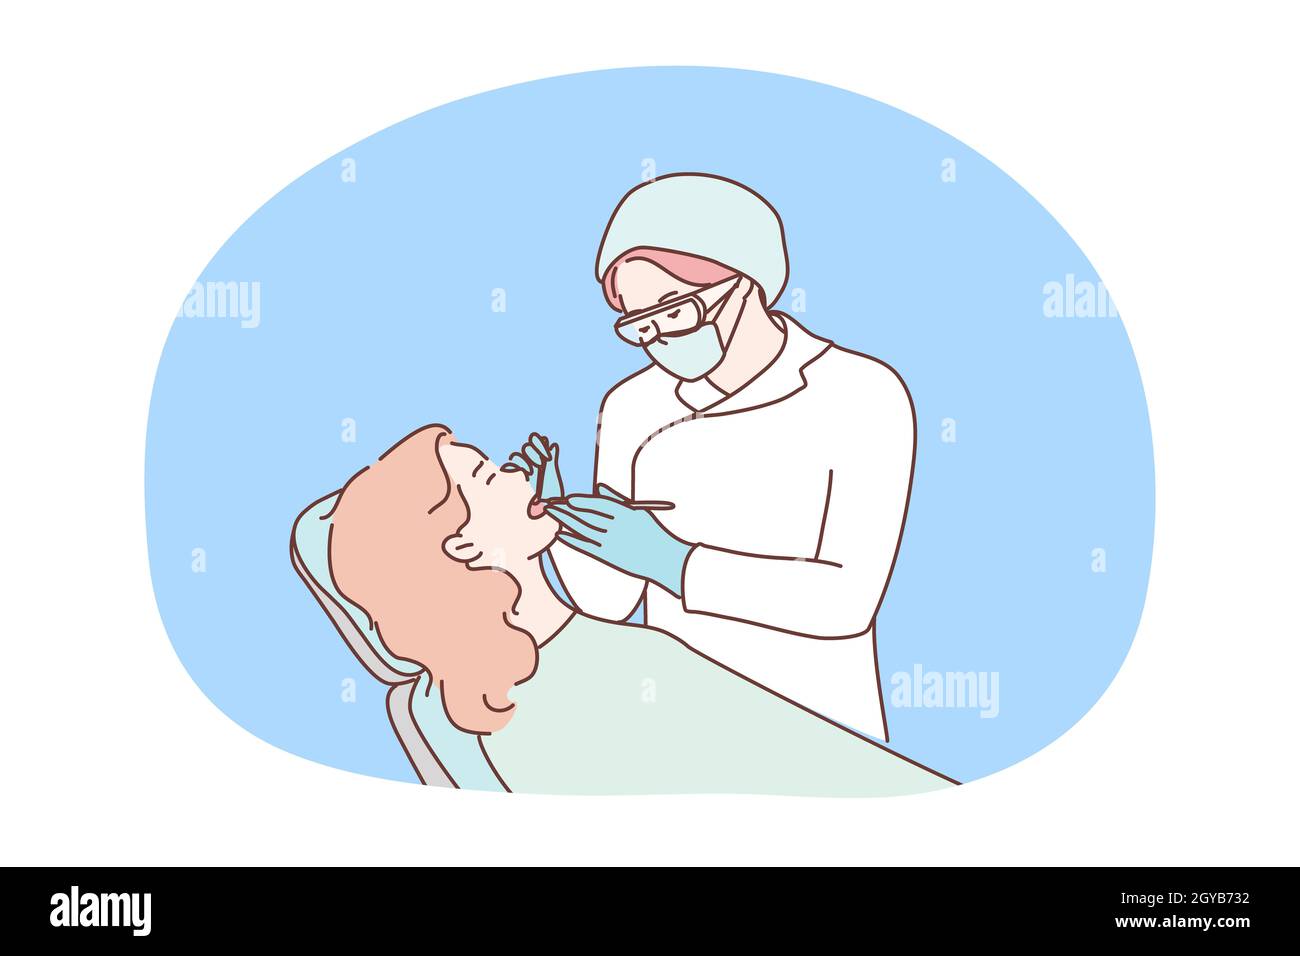 Health, care, medicine, dentistry concept. Woman doctor dentist checking examinates healing teeth of patient in special chair. Routine dental checkup Stock Photo